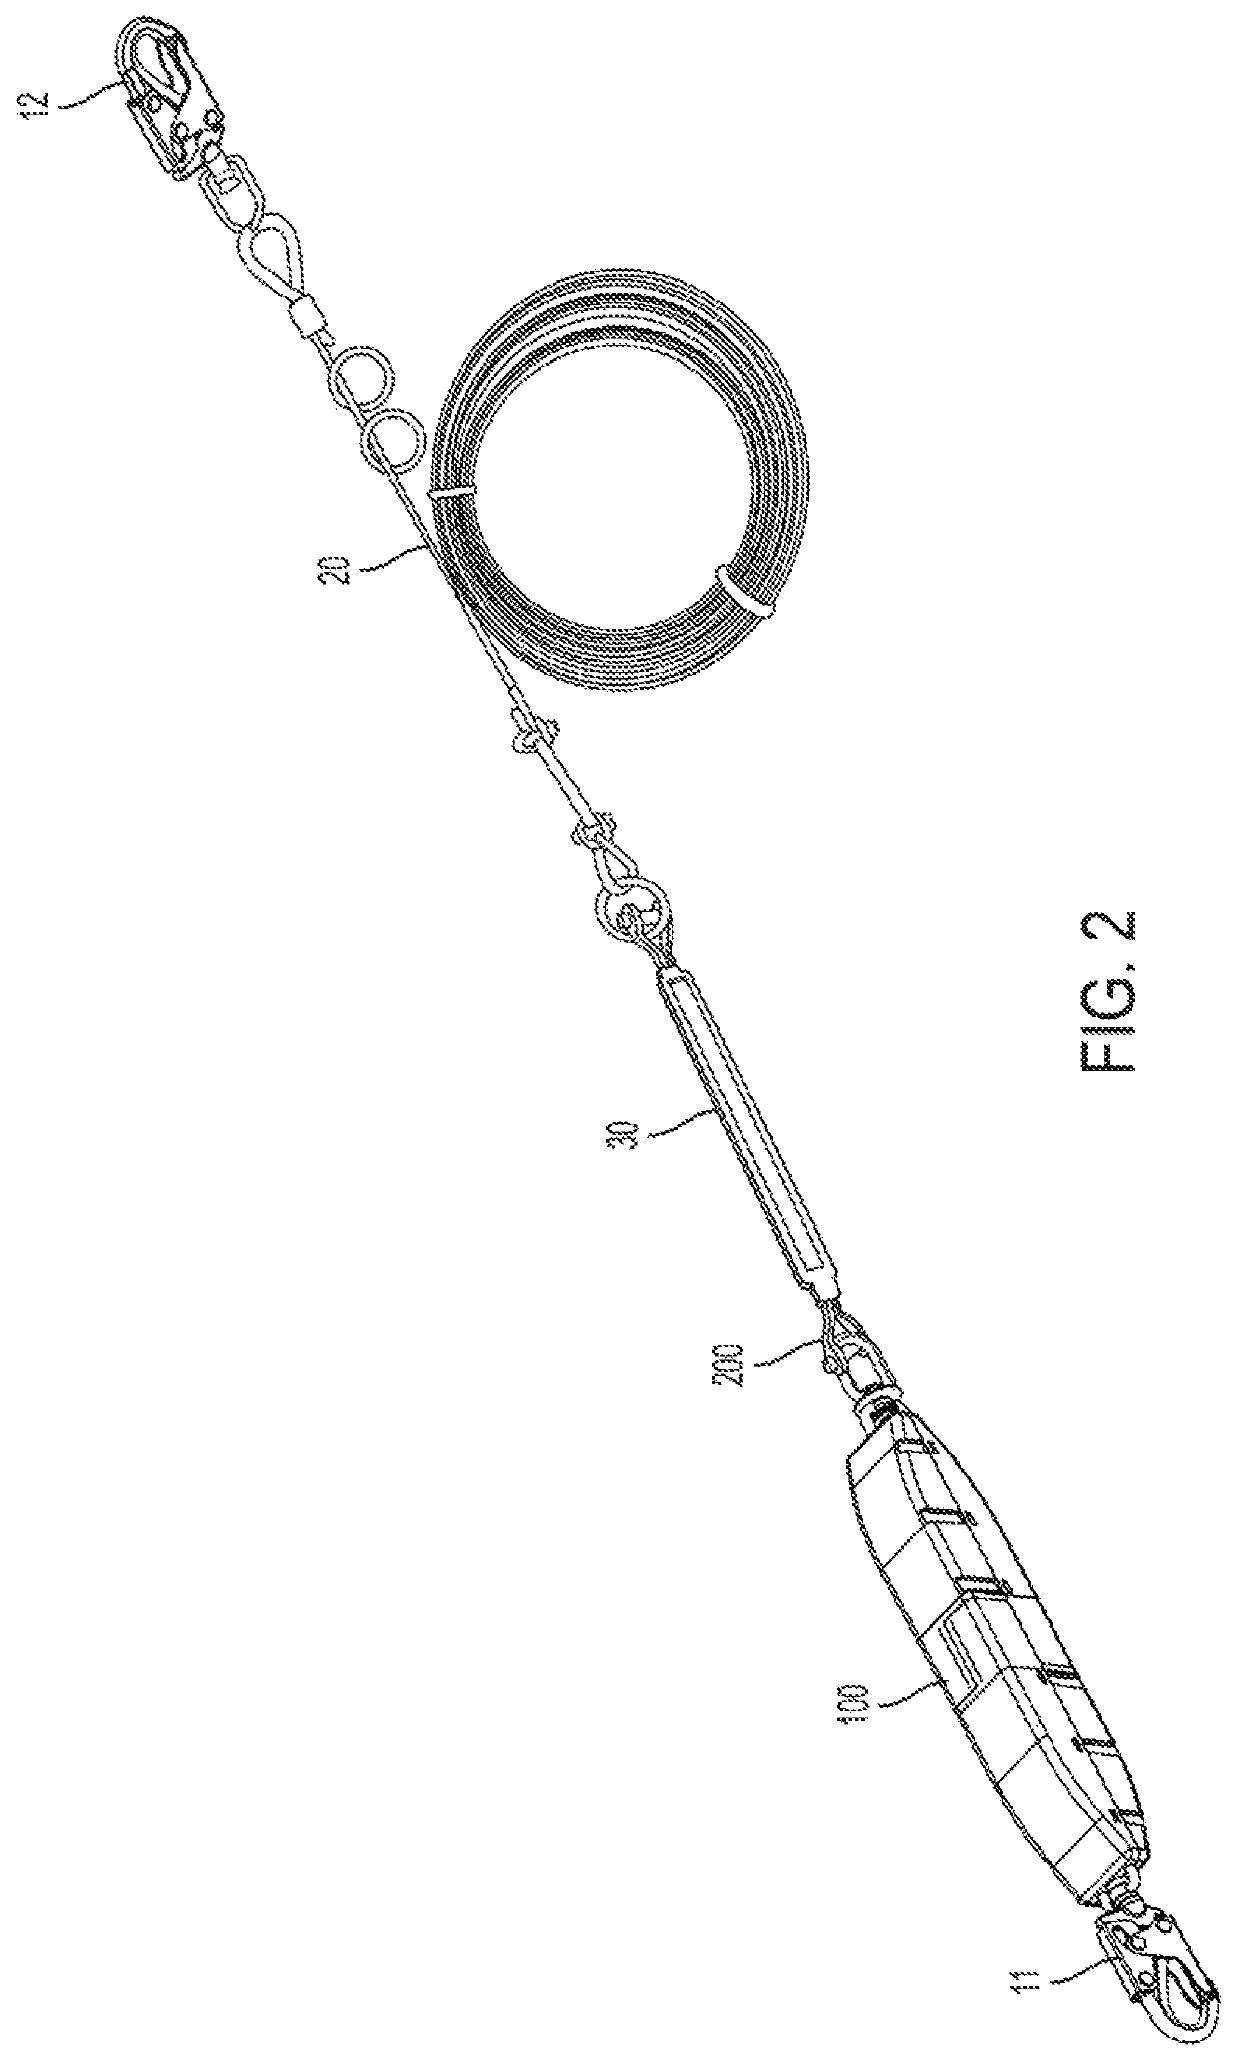 Energy absorber cover and horizontal lifeline system including the same